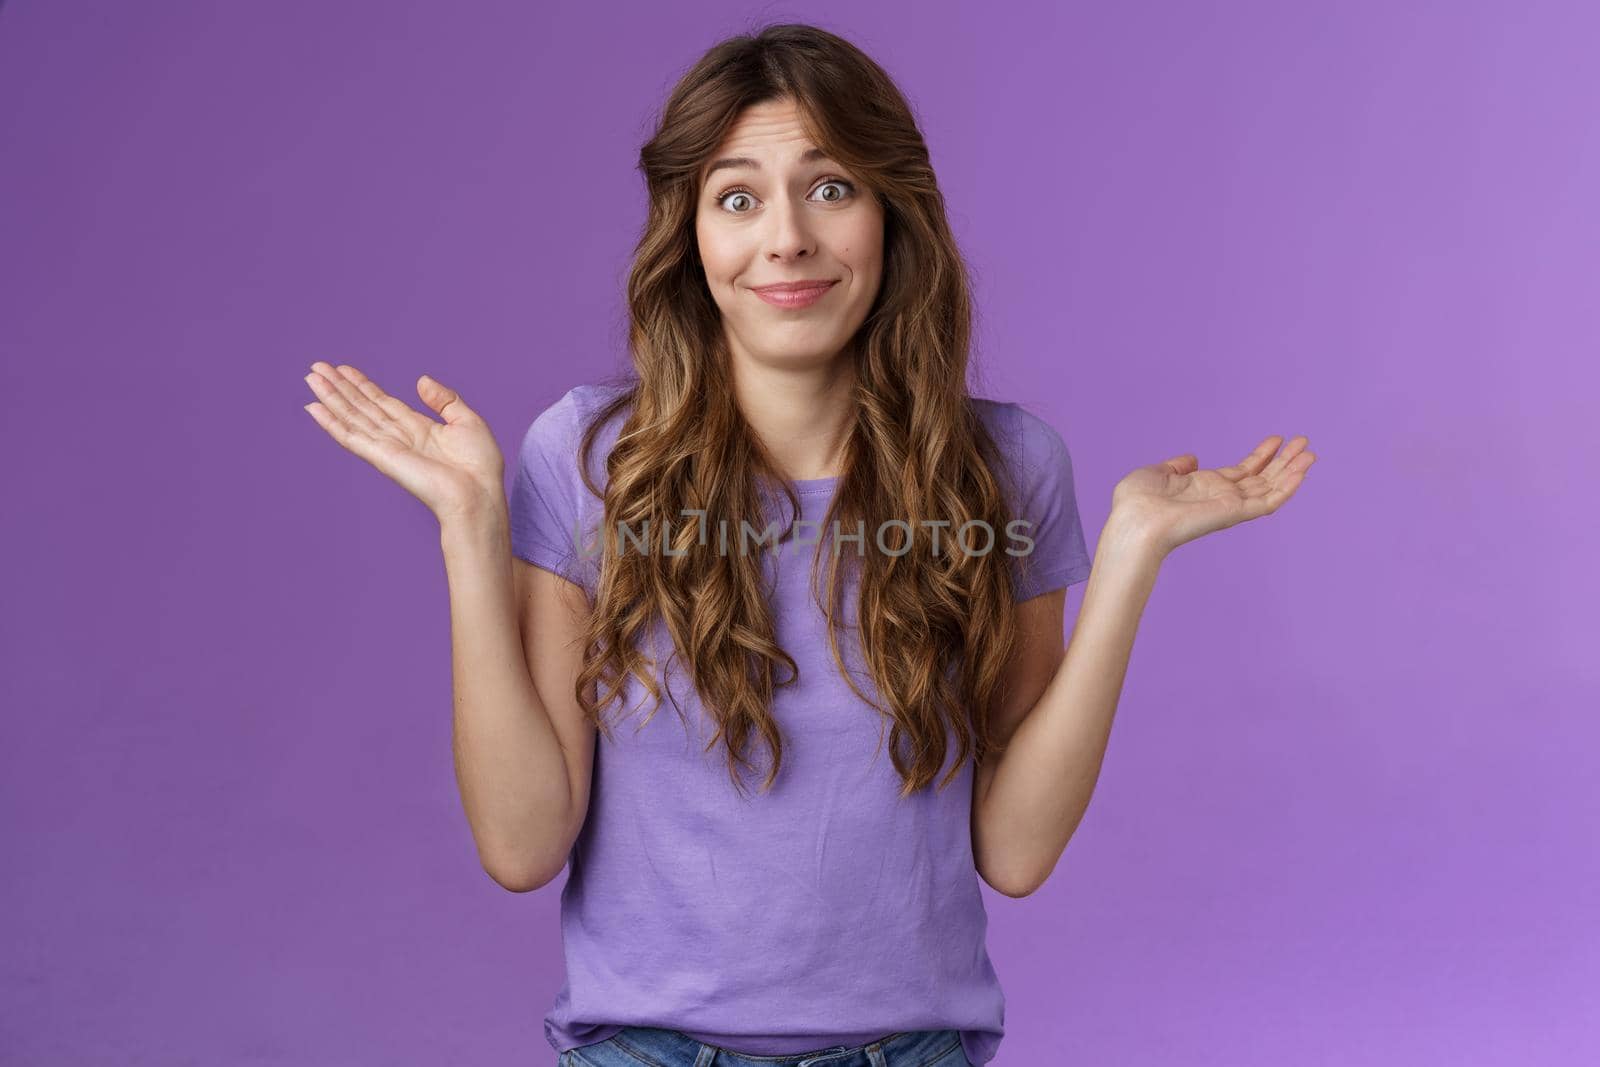 Girl not giving any care. Carefree unbothered cute caucasian curly-haired woman shrugging hands spread sideways smirking uninterseted nothing to say shake head questioned clueless purple background.